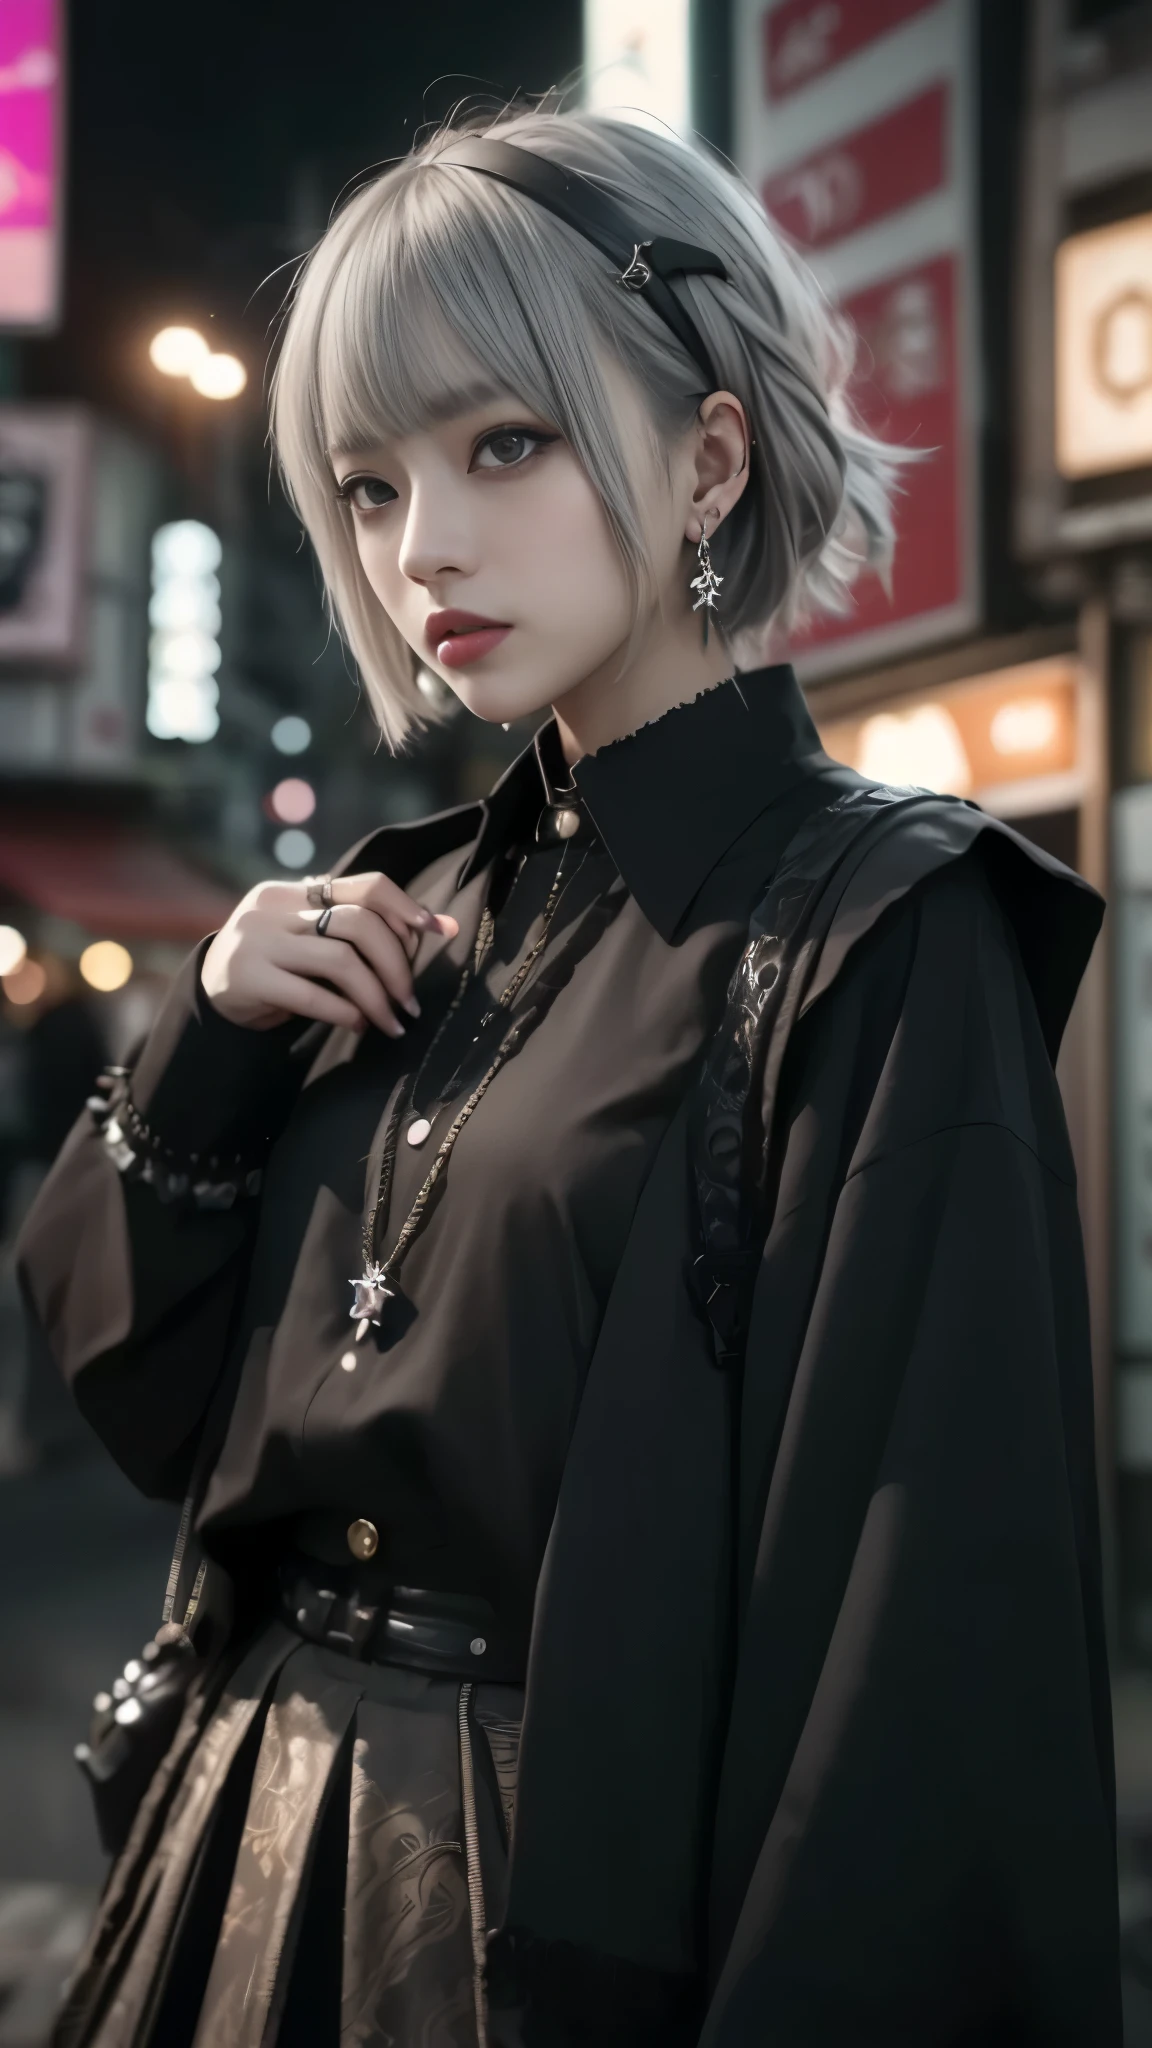 highest quality,high resolution、High resolution、( masterpiece),gray hair, silver hair、gold eyes,gothic punk costume、look up, Upper body,hair bundle,Fair skin,(Realism:1.5、realistic、Photoreal)、black、earrings、amount、gothic skirt、goth_punk, one woman、独奏, short hair,  ((midnight、neon town)),  look at the audience, short hair, portrait, side lock、masterpiece、highest quality、最high resolution、最High resolution、Super detailed、Super exquisite、Realistic texture face and body、larger breasts:1.3、thin waist、deep red lipstick、Swollen eyes、red eyeshadow、dynamic pose、